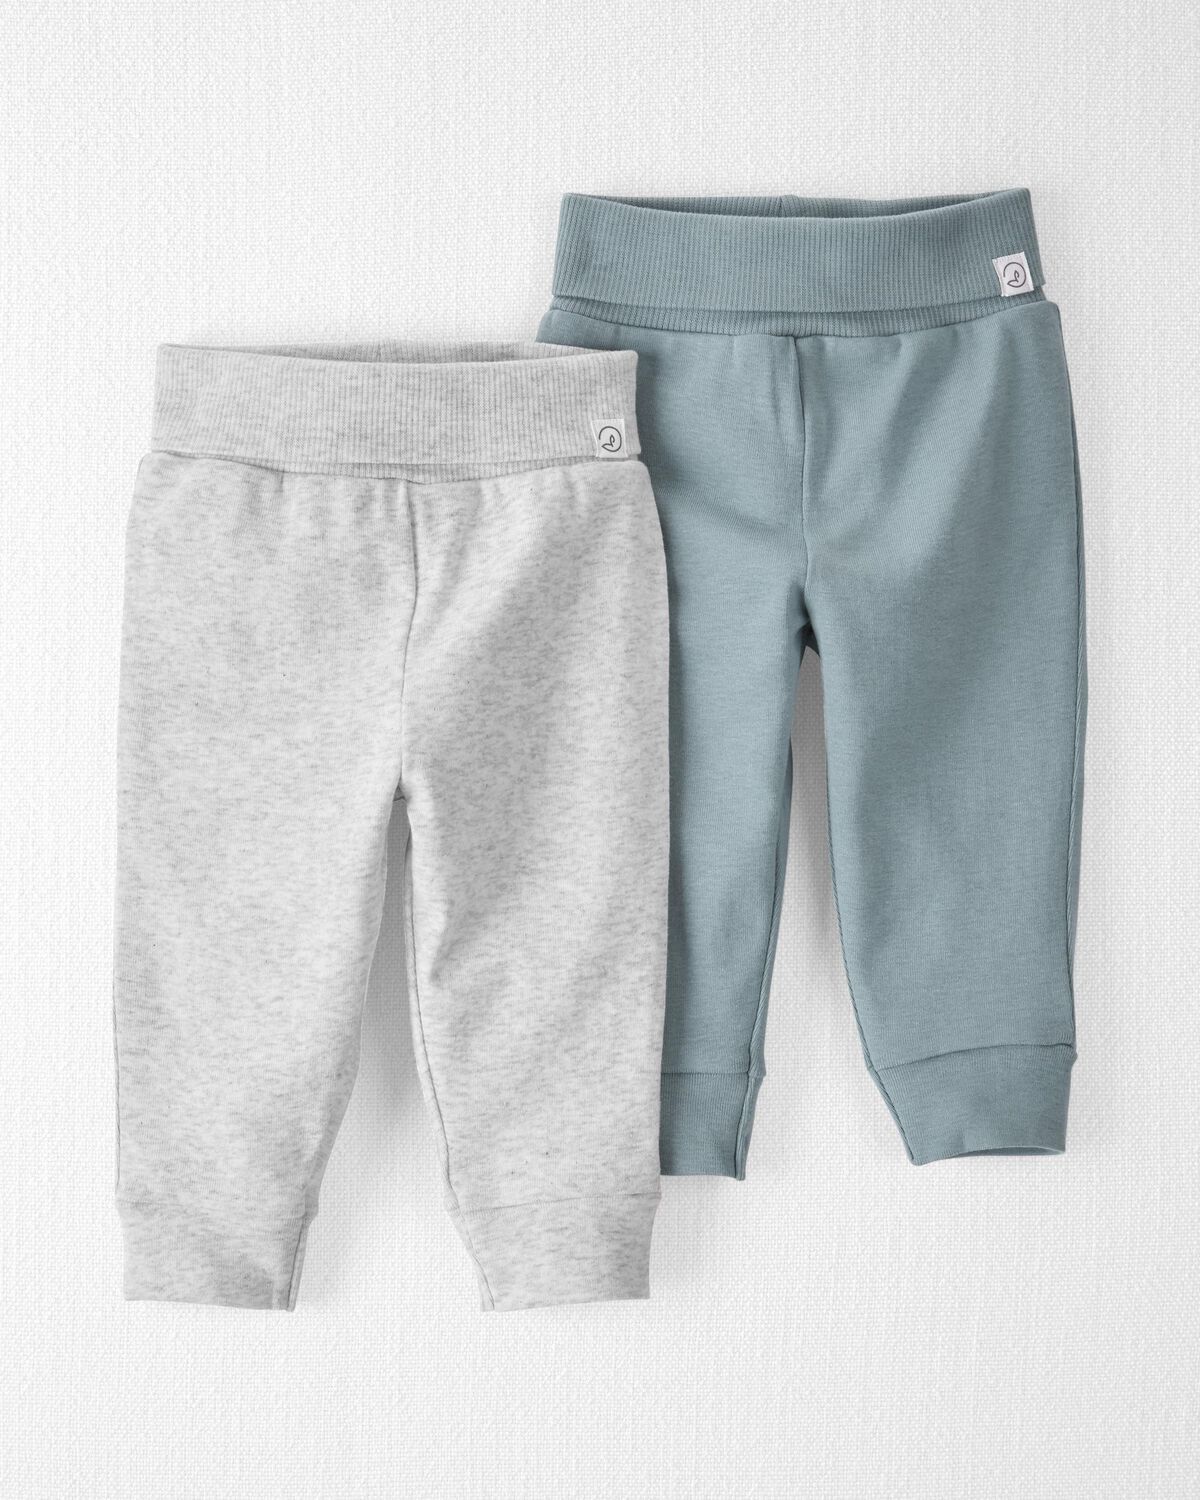 Blue/Grey Baby 2-Pack Joggers | carters.com | Carter's